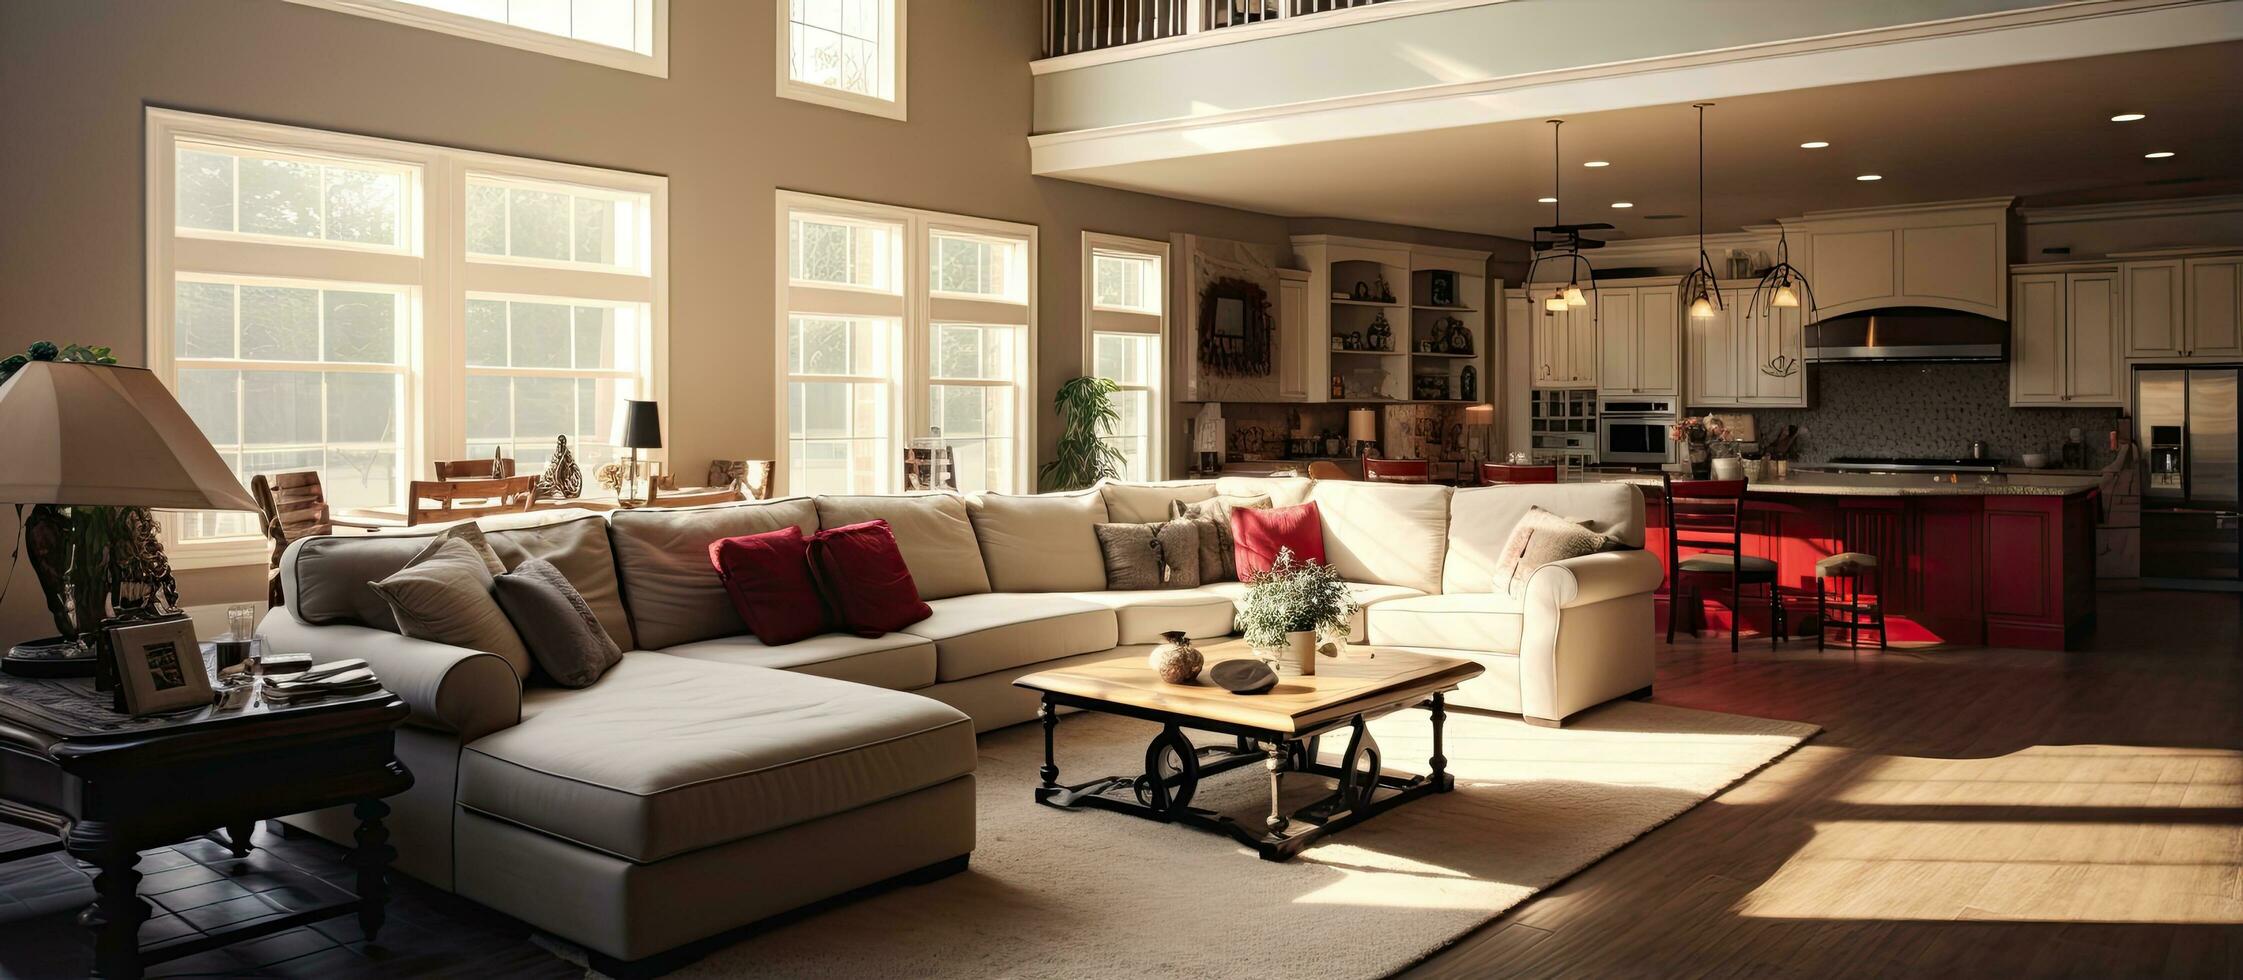 Spacious and inviting living area photo